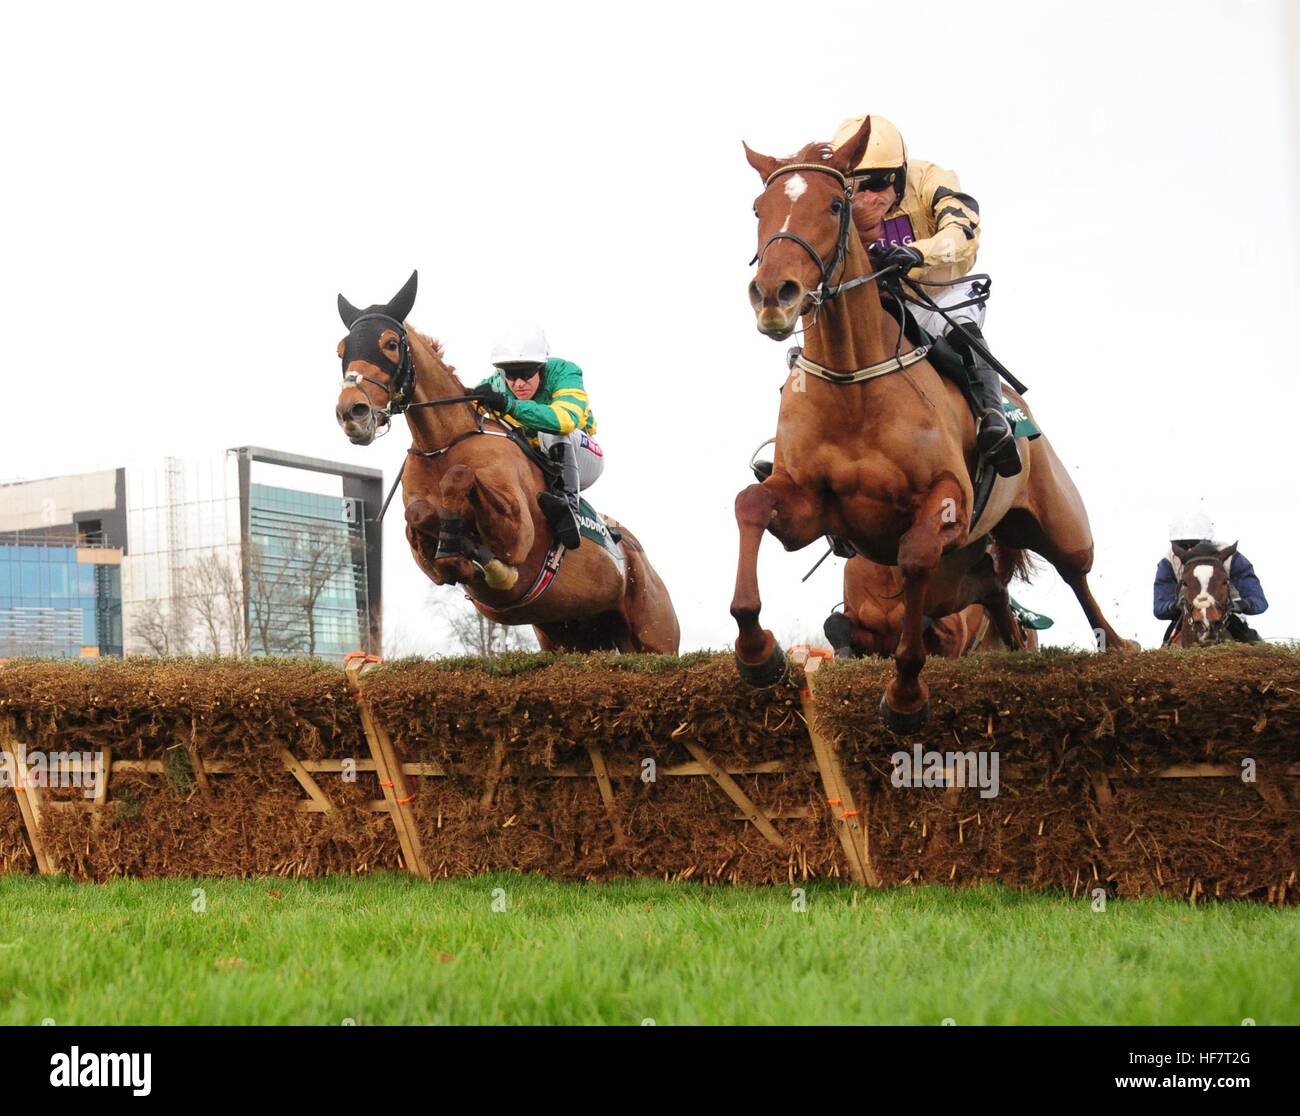 Meri Devie ridden by Ruby Walsh (right) before winning the Paddy Power Ã¢Â€Â˜Only 363 Days Till ChristmasÃ¢Â€Â™ 3-Y-O Maiden Hurdle ahead of Housesofparliament ridden by Barry Geraghty (left) during day two of the Christmas Festival at Leopardstown Racecourse. Stock Photo